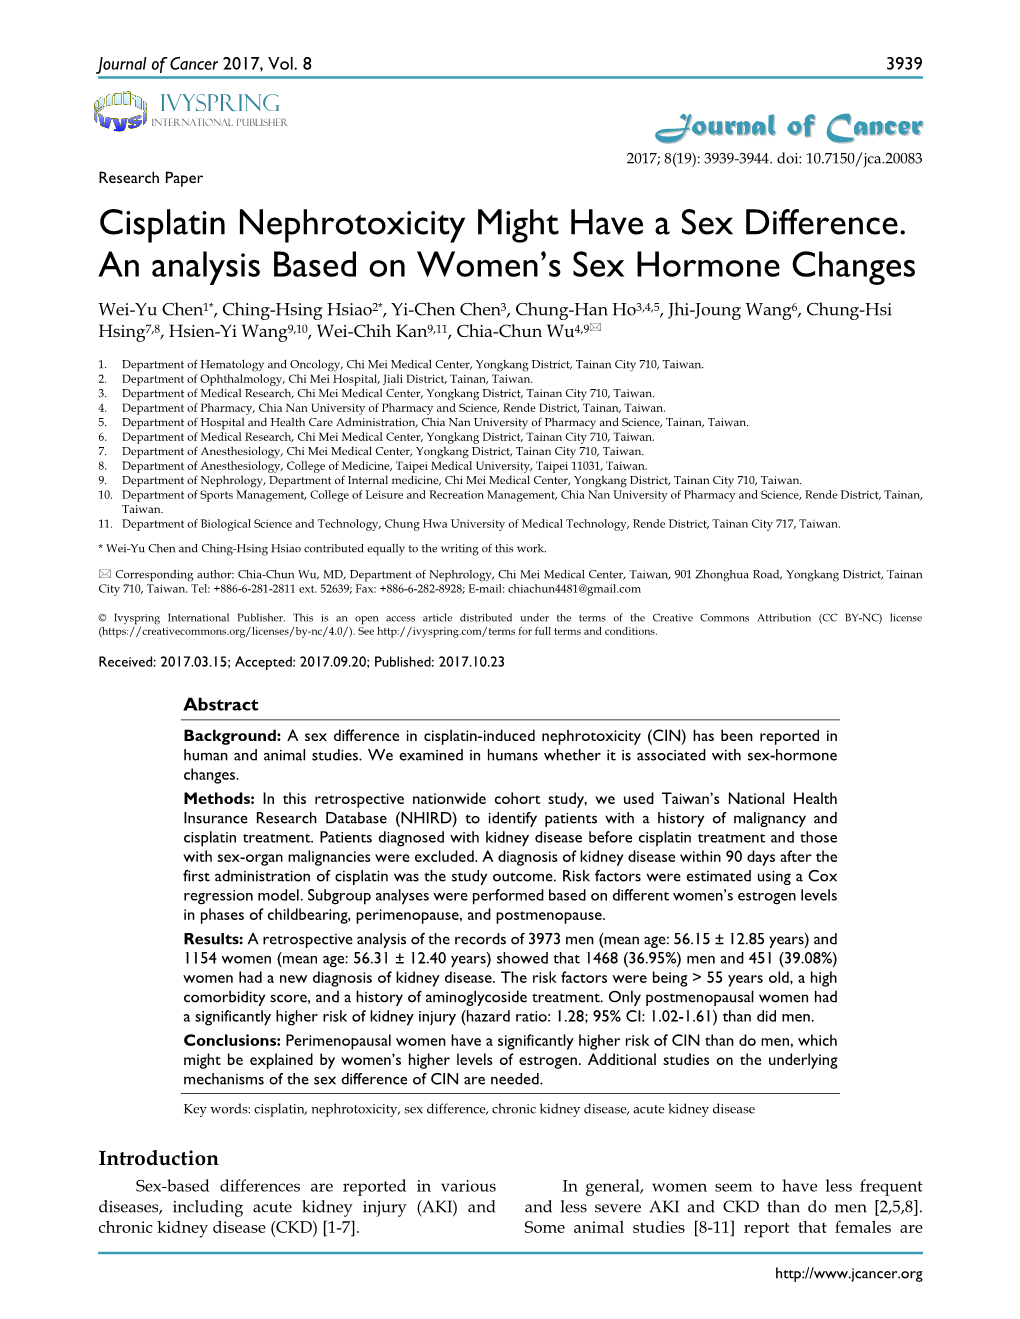 Cisplatin Nephrotoxicity Might Have a Sex Difference. an Analysis Based